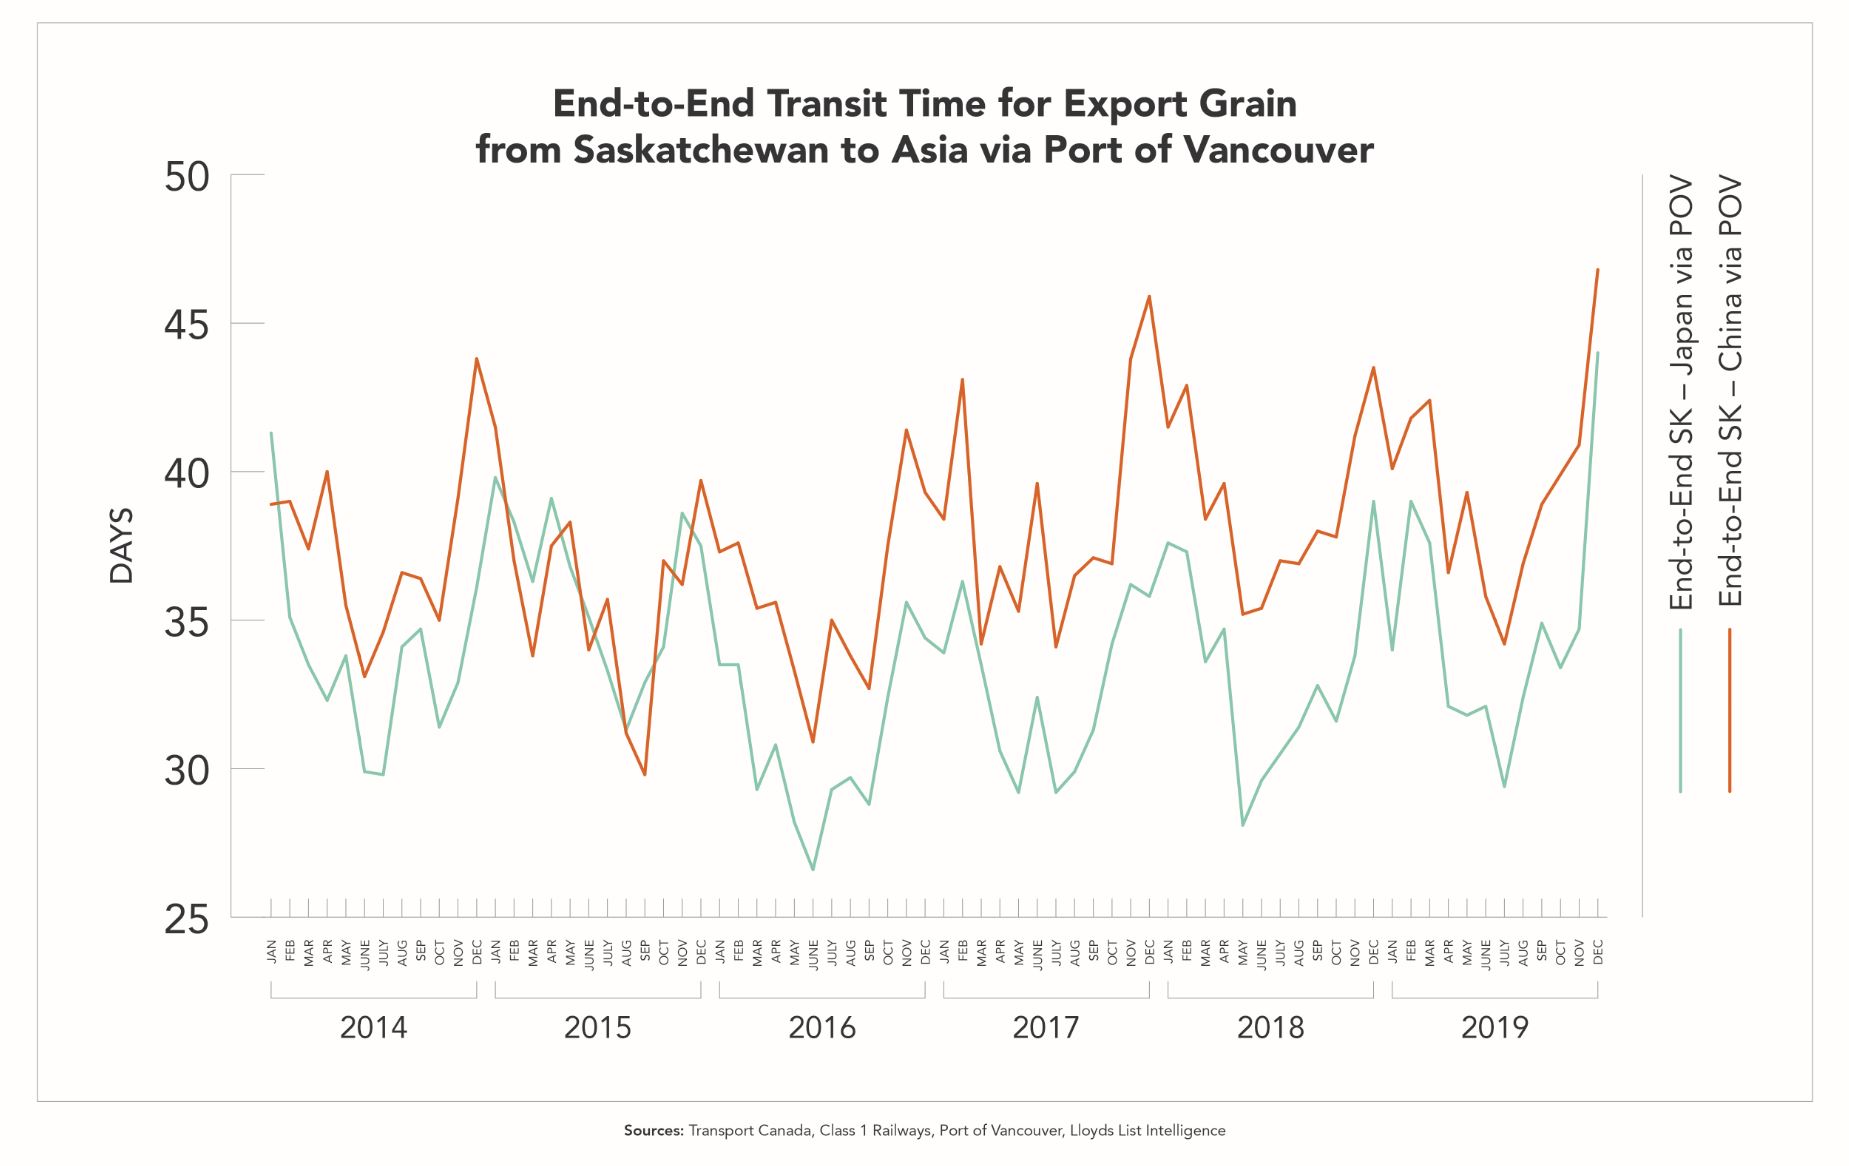 End-to-End Transit Time for Export Grain from Saskatchewan to Asia via Port of Vancouver